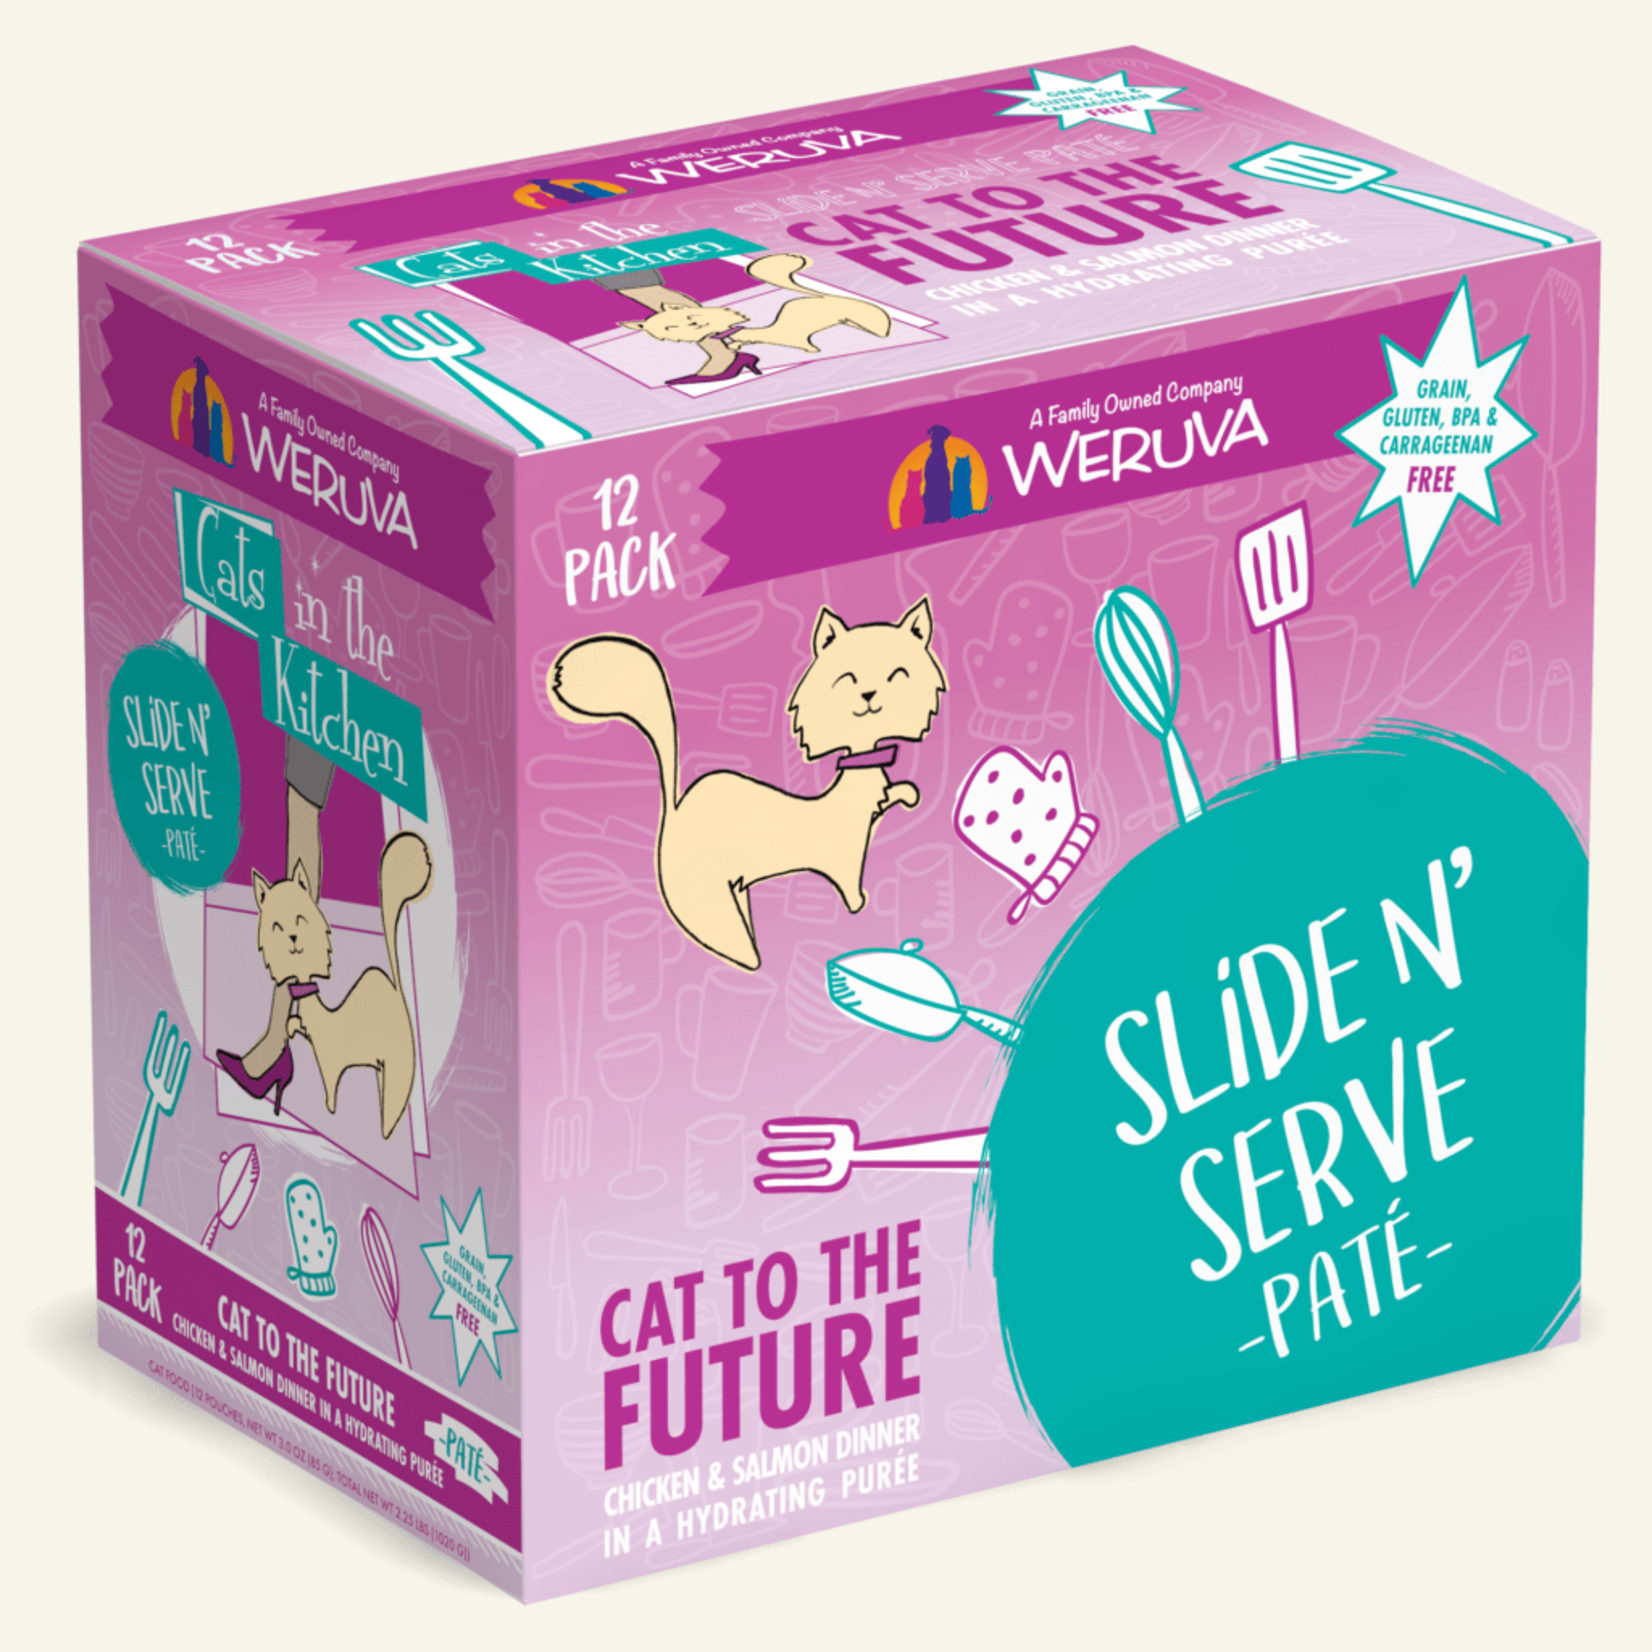 Weruva Weruva Wet Cat Food Cats in the Kitchen Slide and Serve Pate Pouch Cat to the Future Chicken and Salmon Dinner 3oz